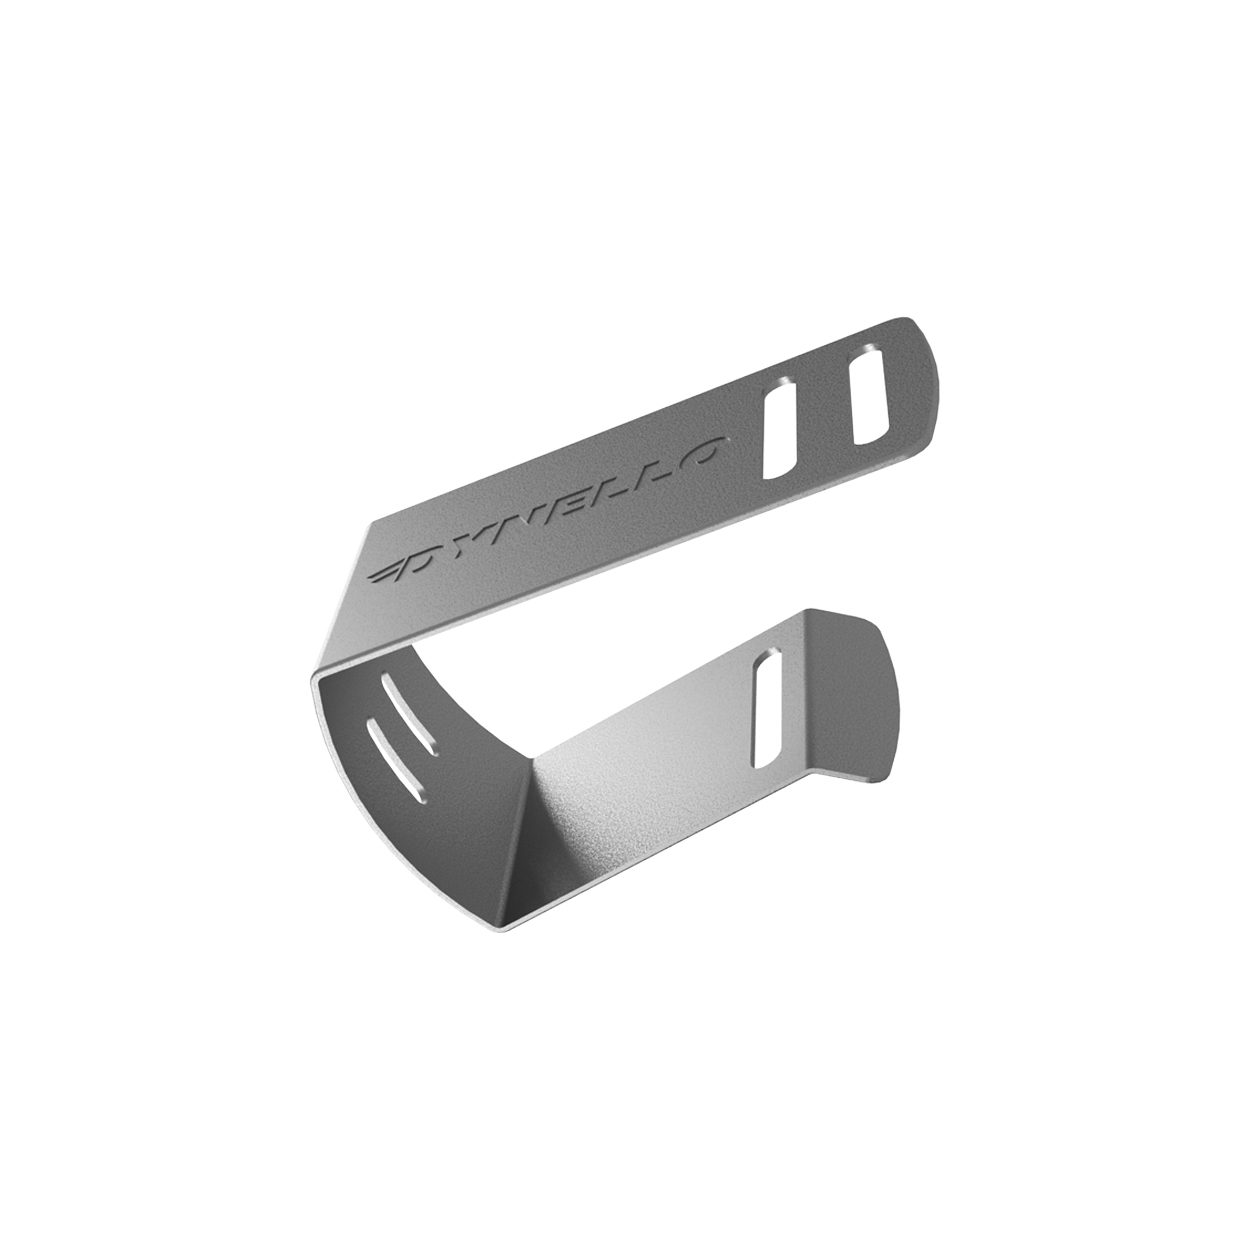 DYNELLO® Clip, 35 mm, Stainless Steel, Strap Clamp